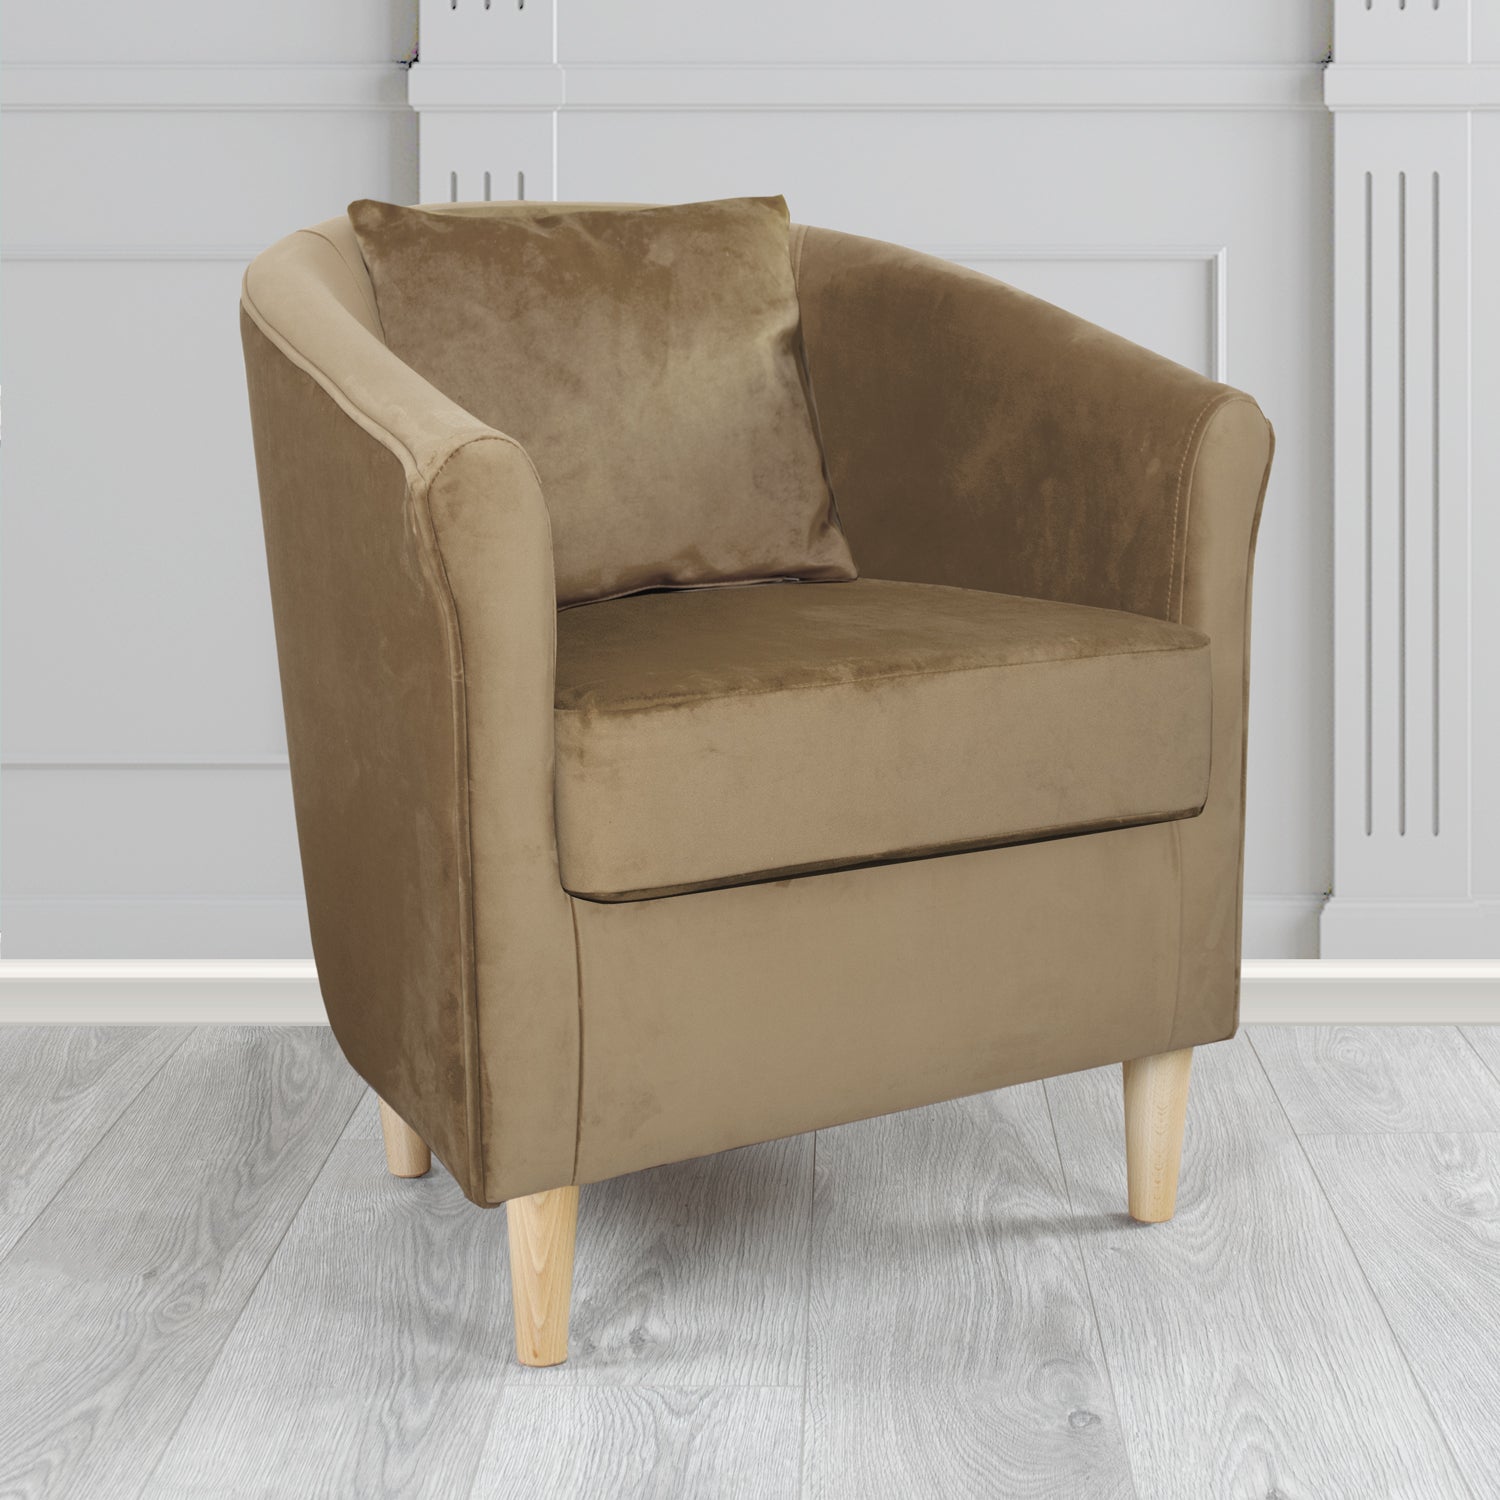 Express St Tropez Monaco Biscuit Plush Velvet Fabric Tub Chair with Scatter Cushion (6604828213290)